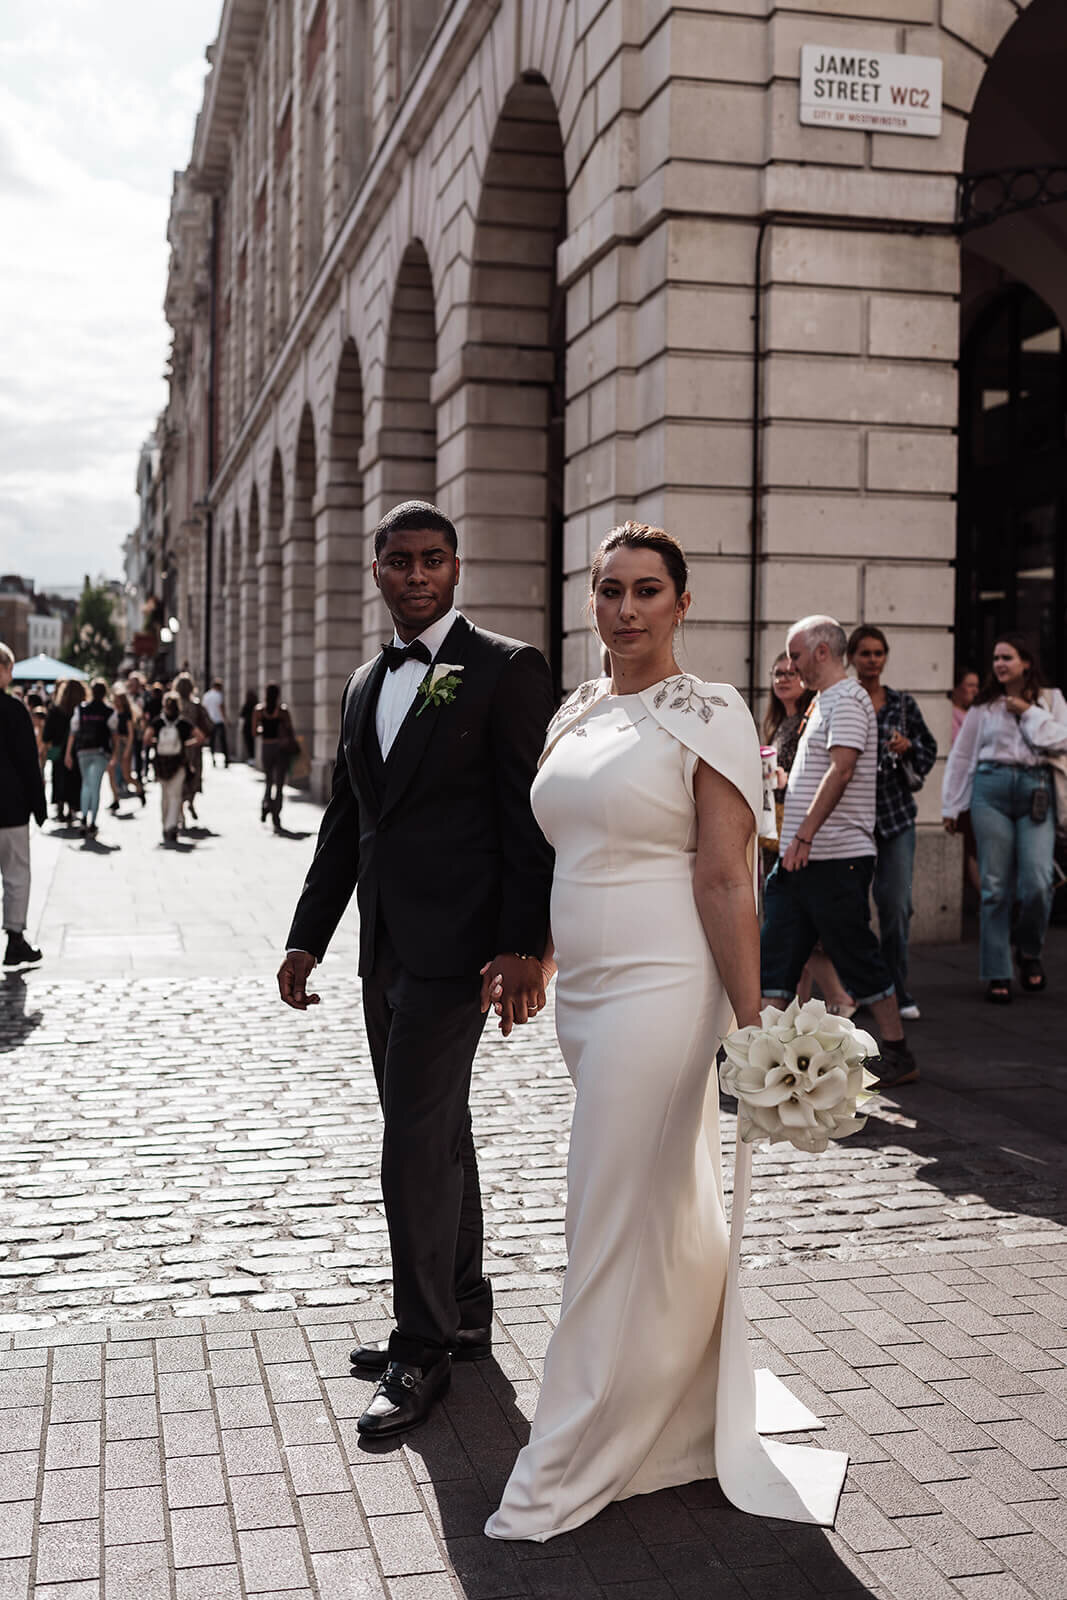 bride and groom hold hands and walk through the streets of covent garden london on their wedding day as people mill around them